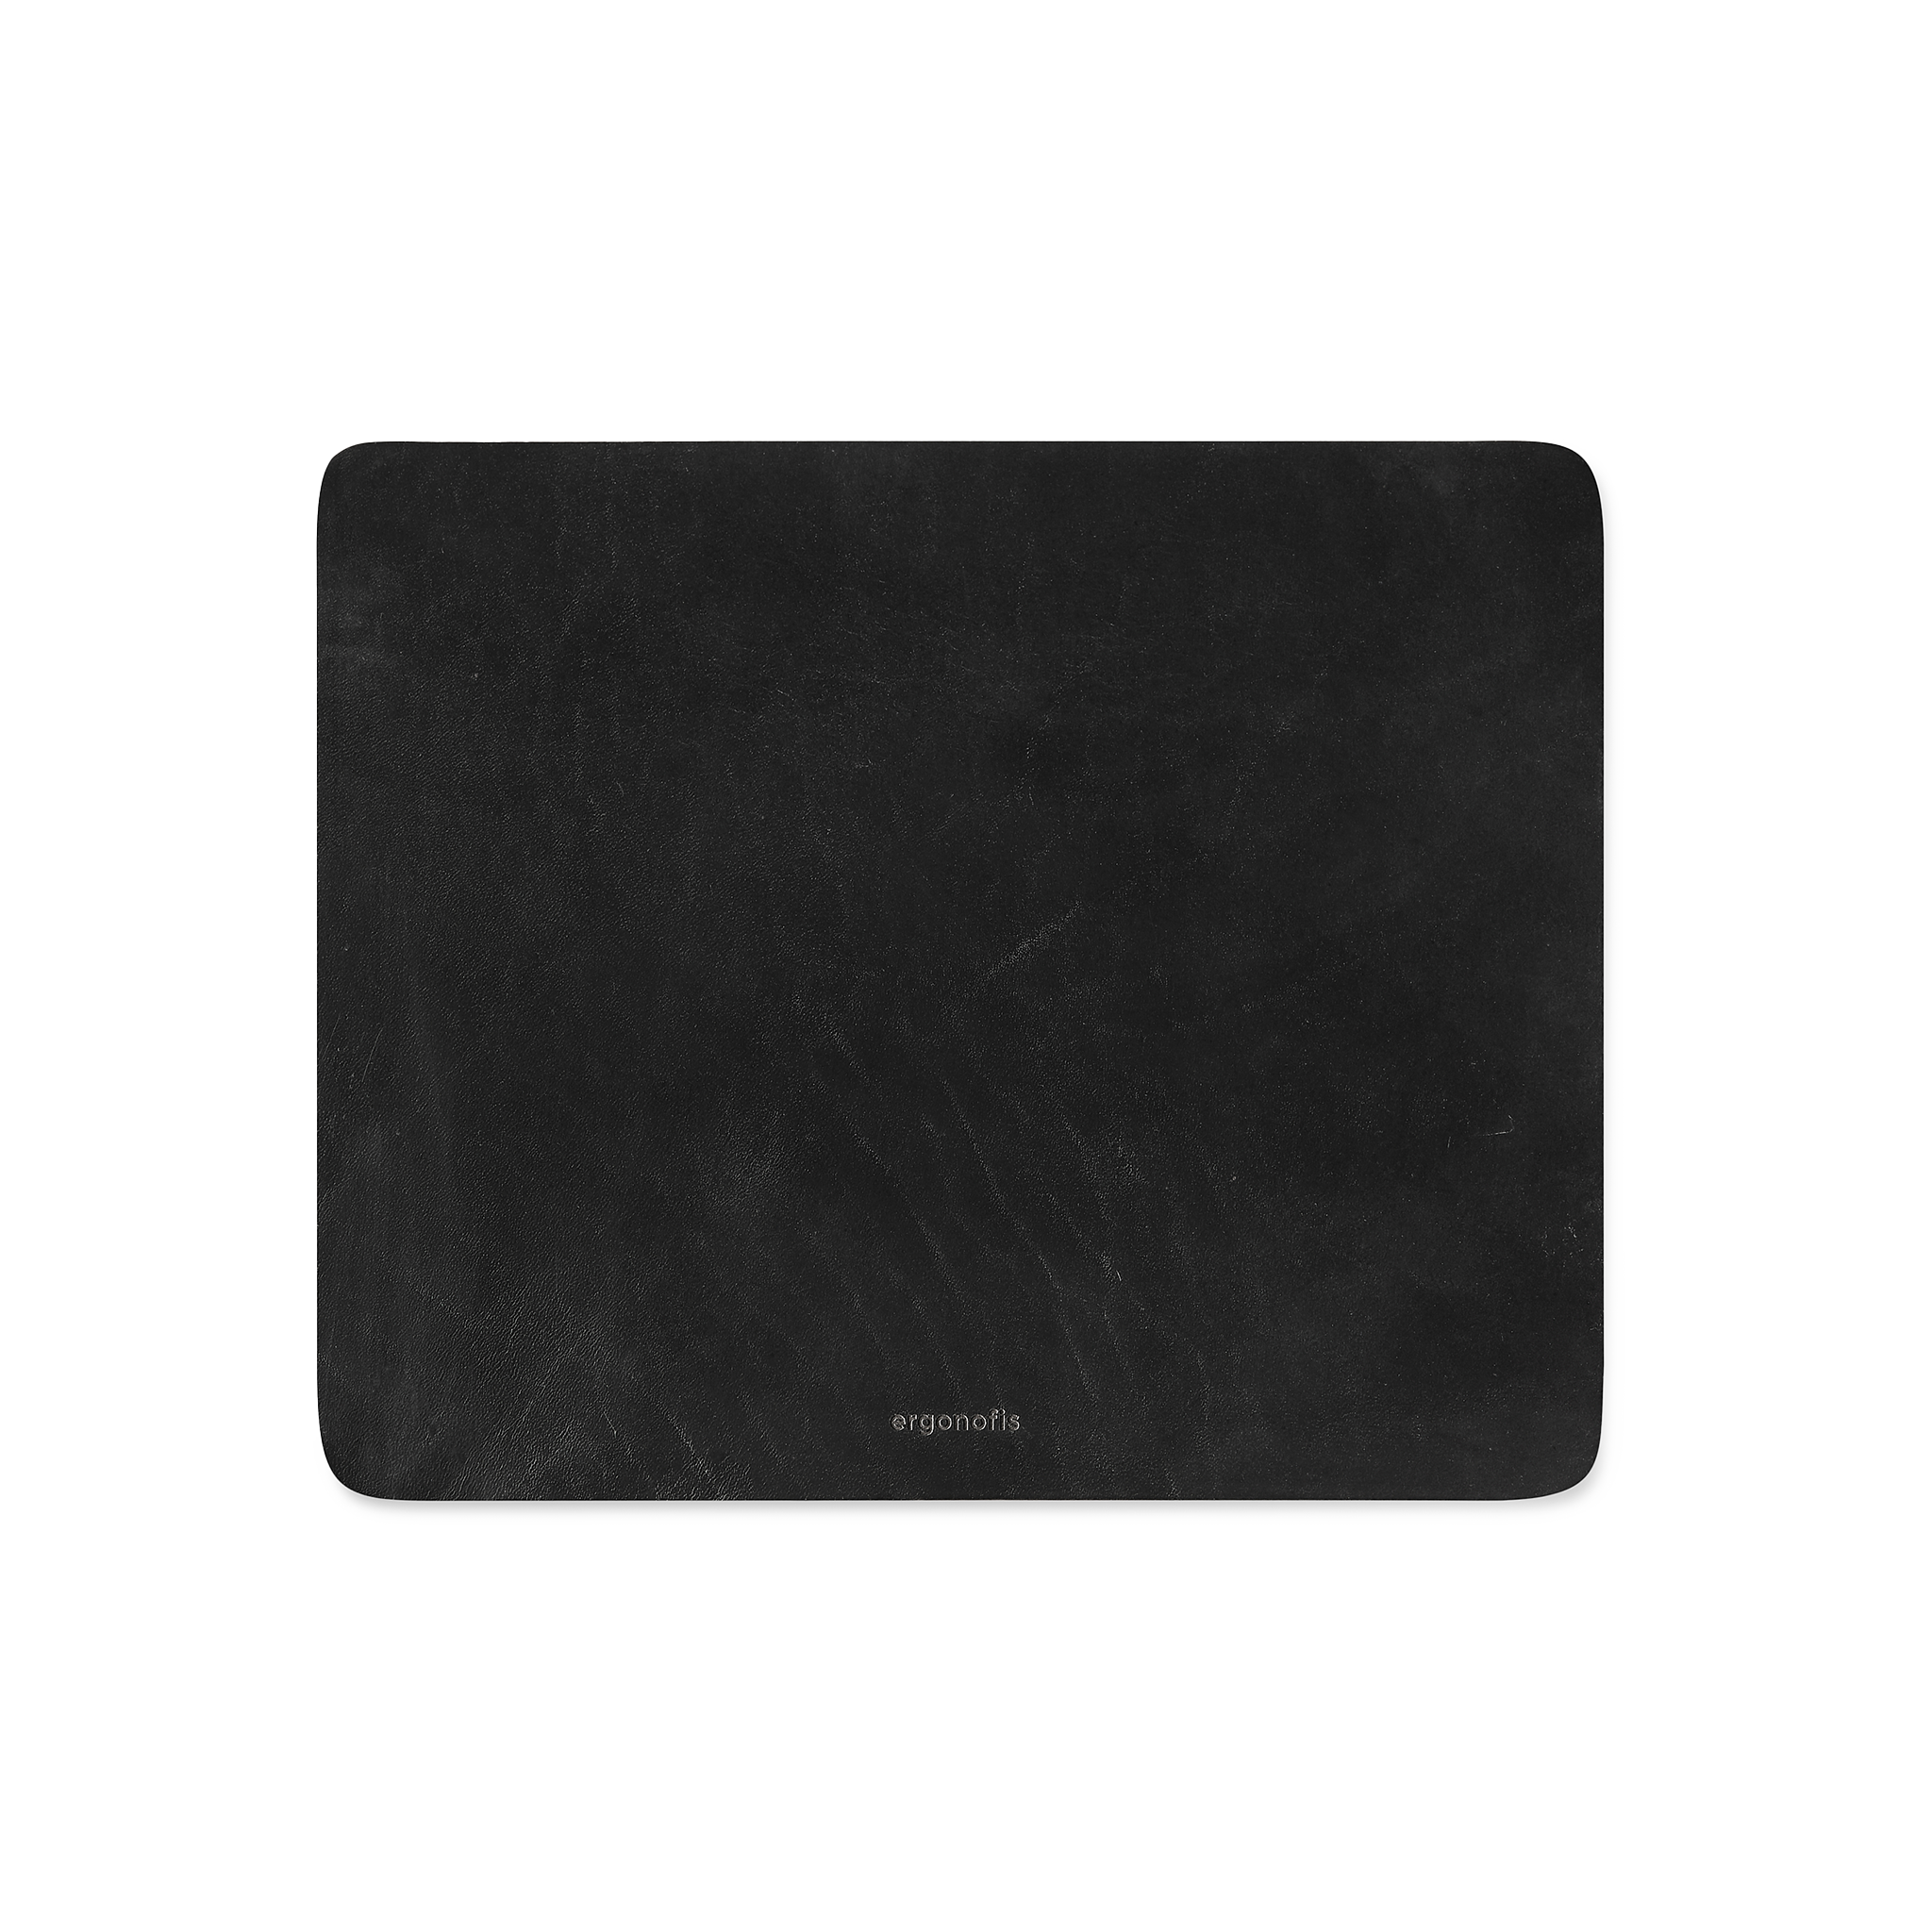 Almost Perfect Leather mouse pad - Black - Noir